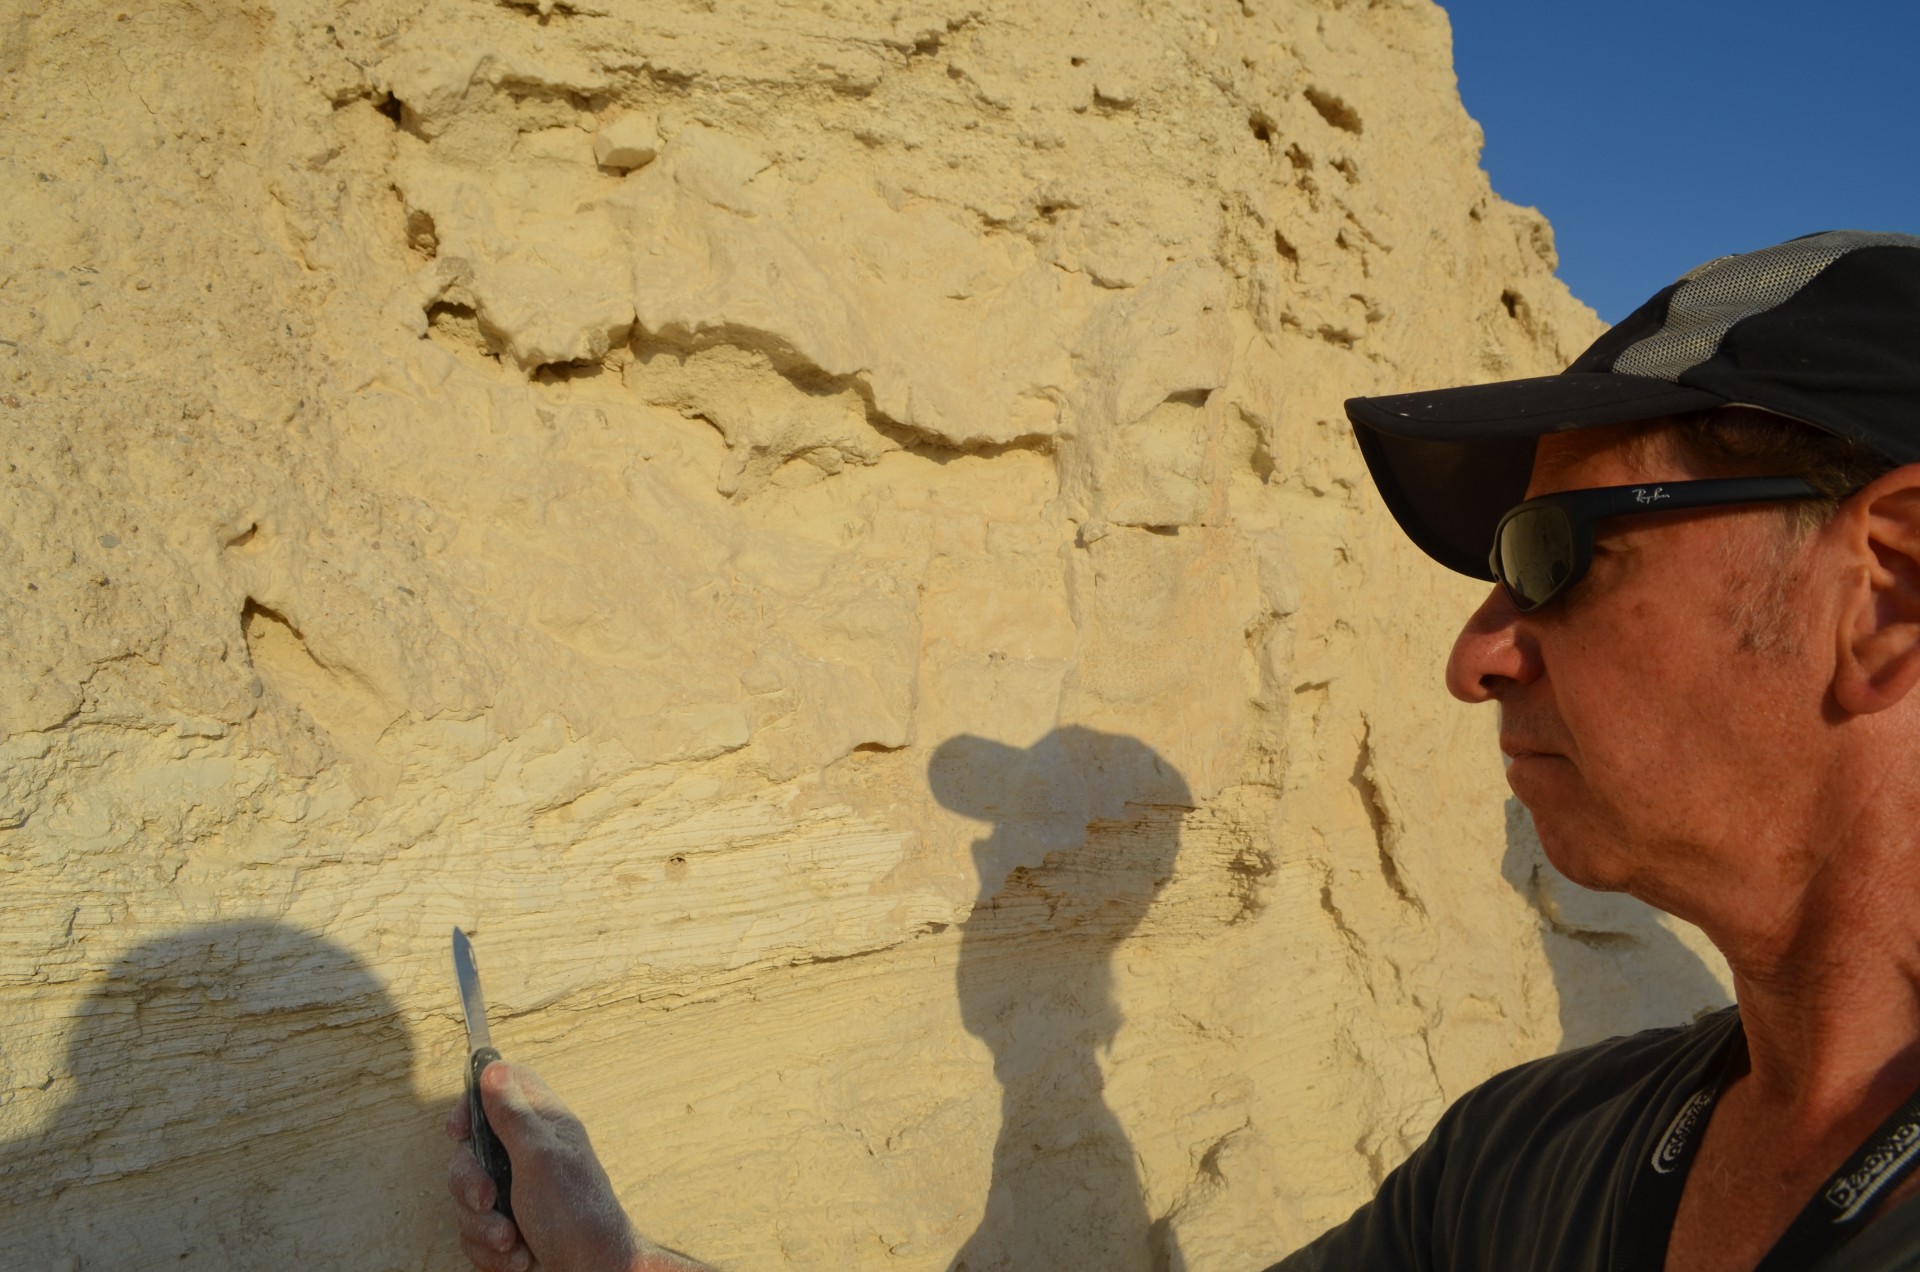 Geoscientist Steven Goldstein of Lamont-Doherty Earth Observatory scrapes at sediments from a long-gone seabed, part of a study on past megadroughts being carried out in Israel and Jordan.